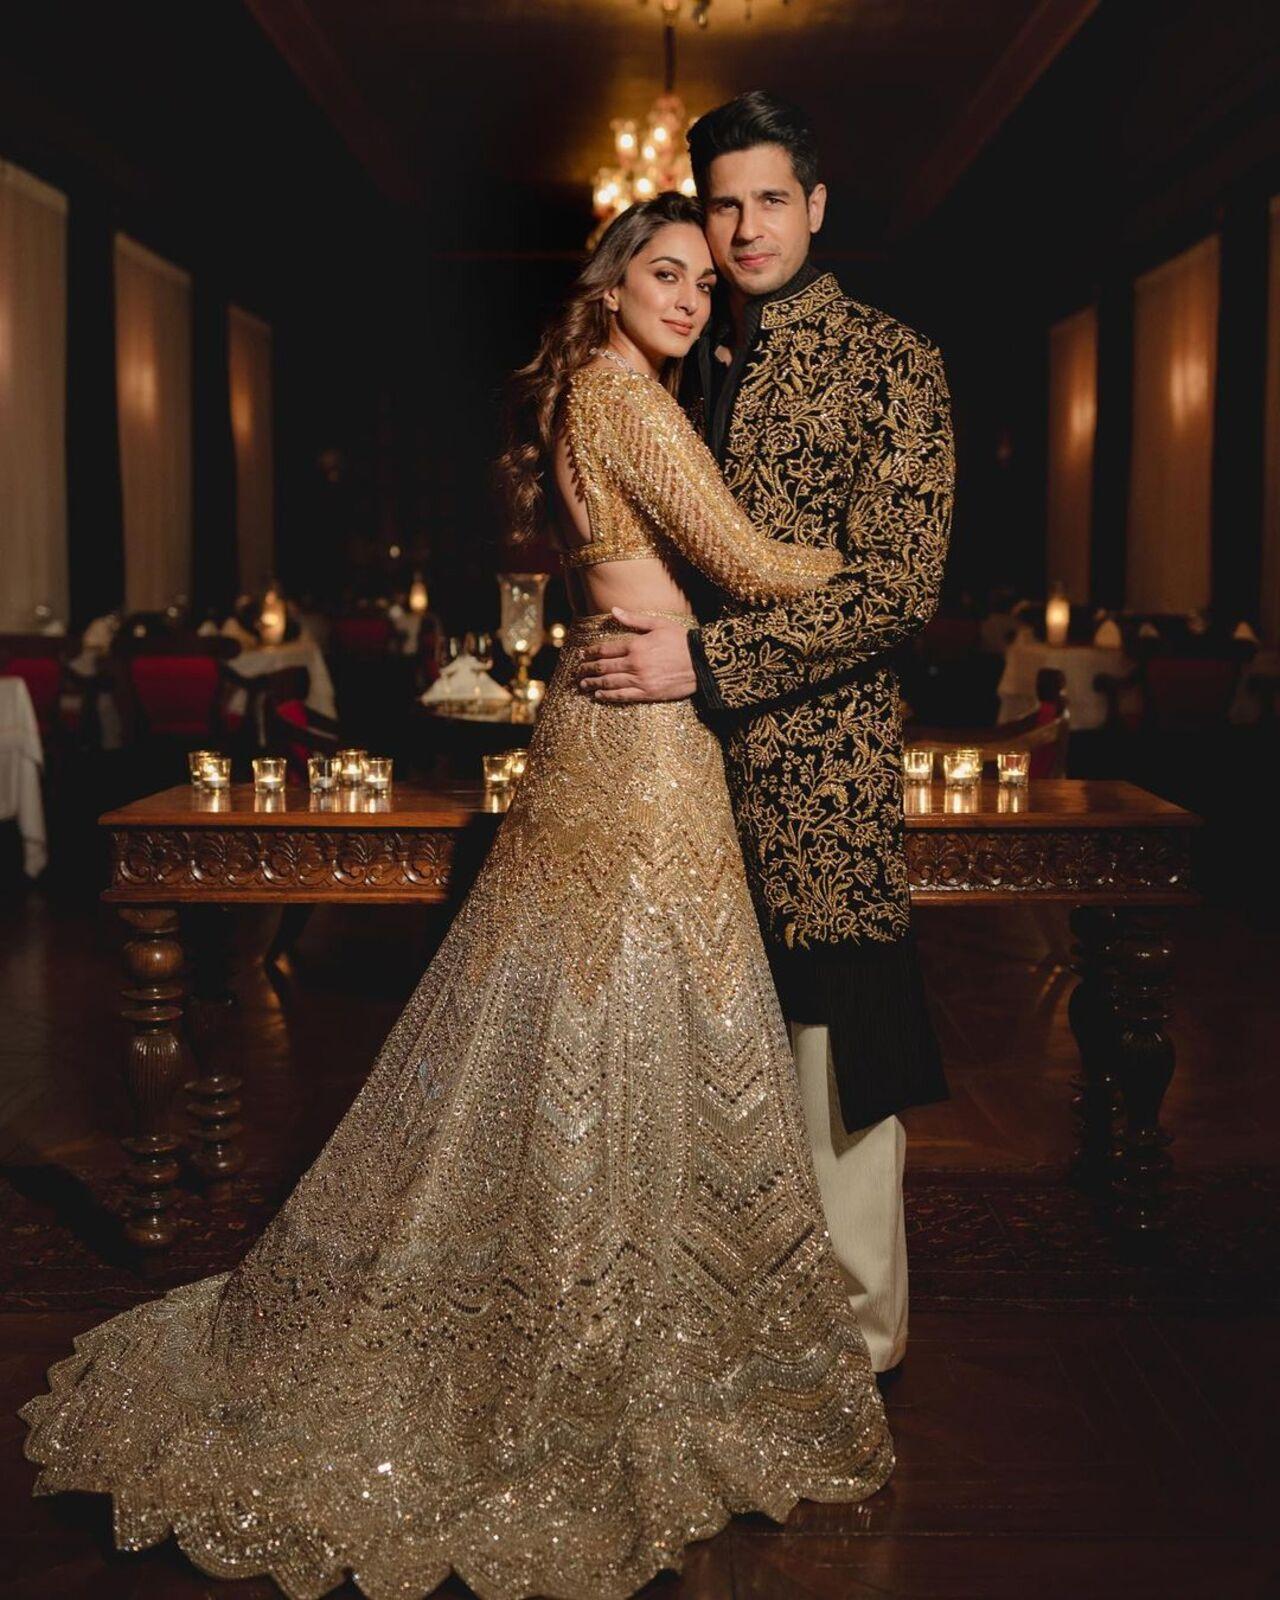 Kiara and Sidharth Malhotra exude royalty in this pic from their wedding festivities